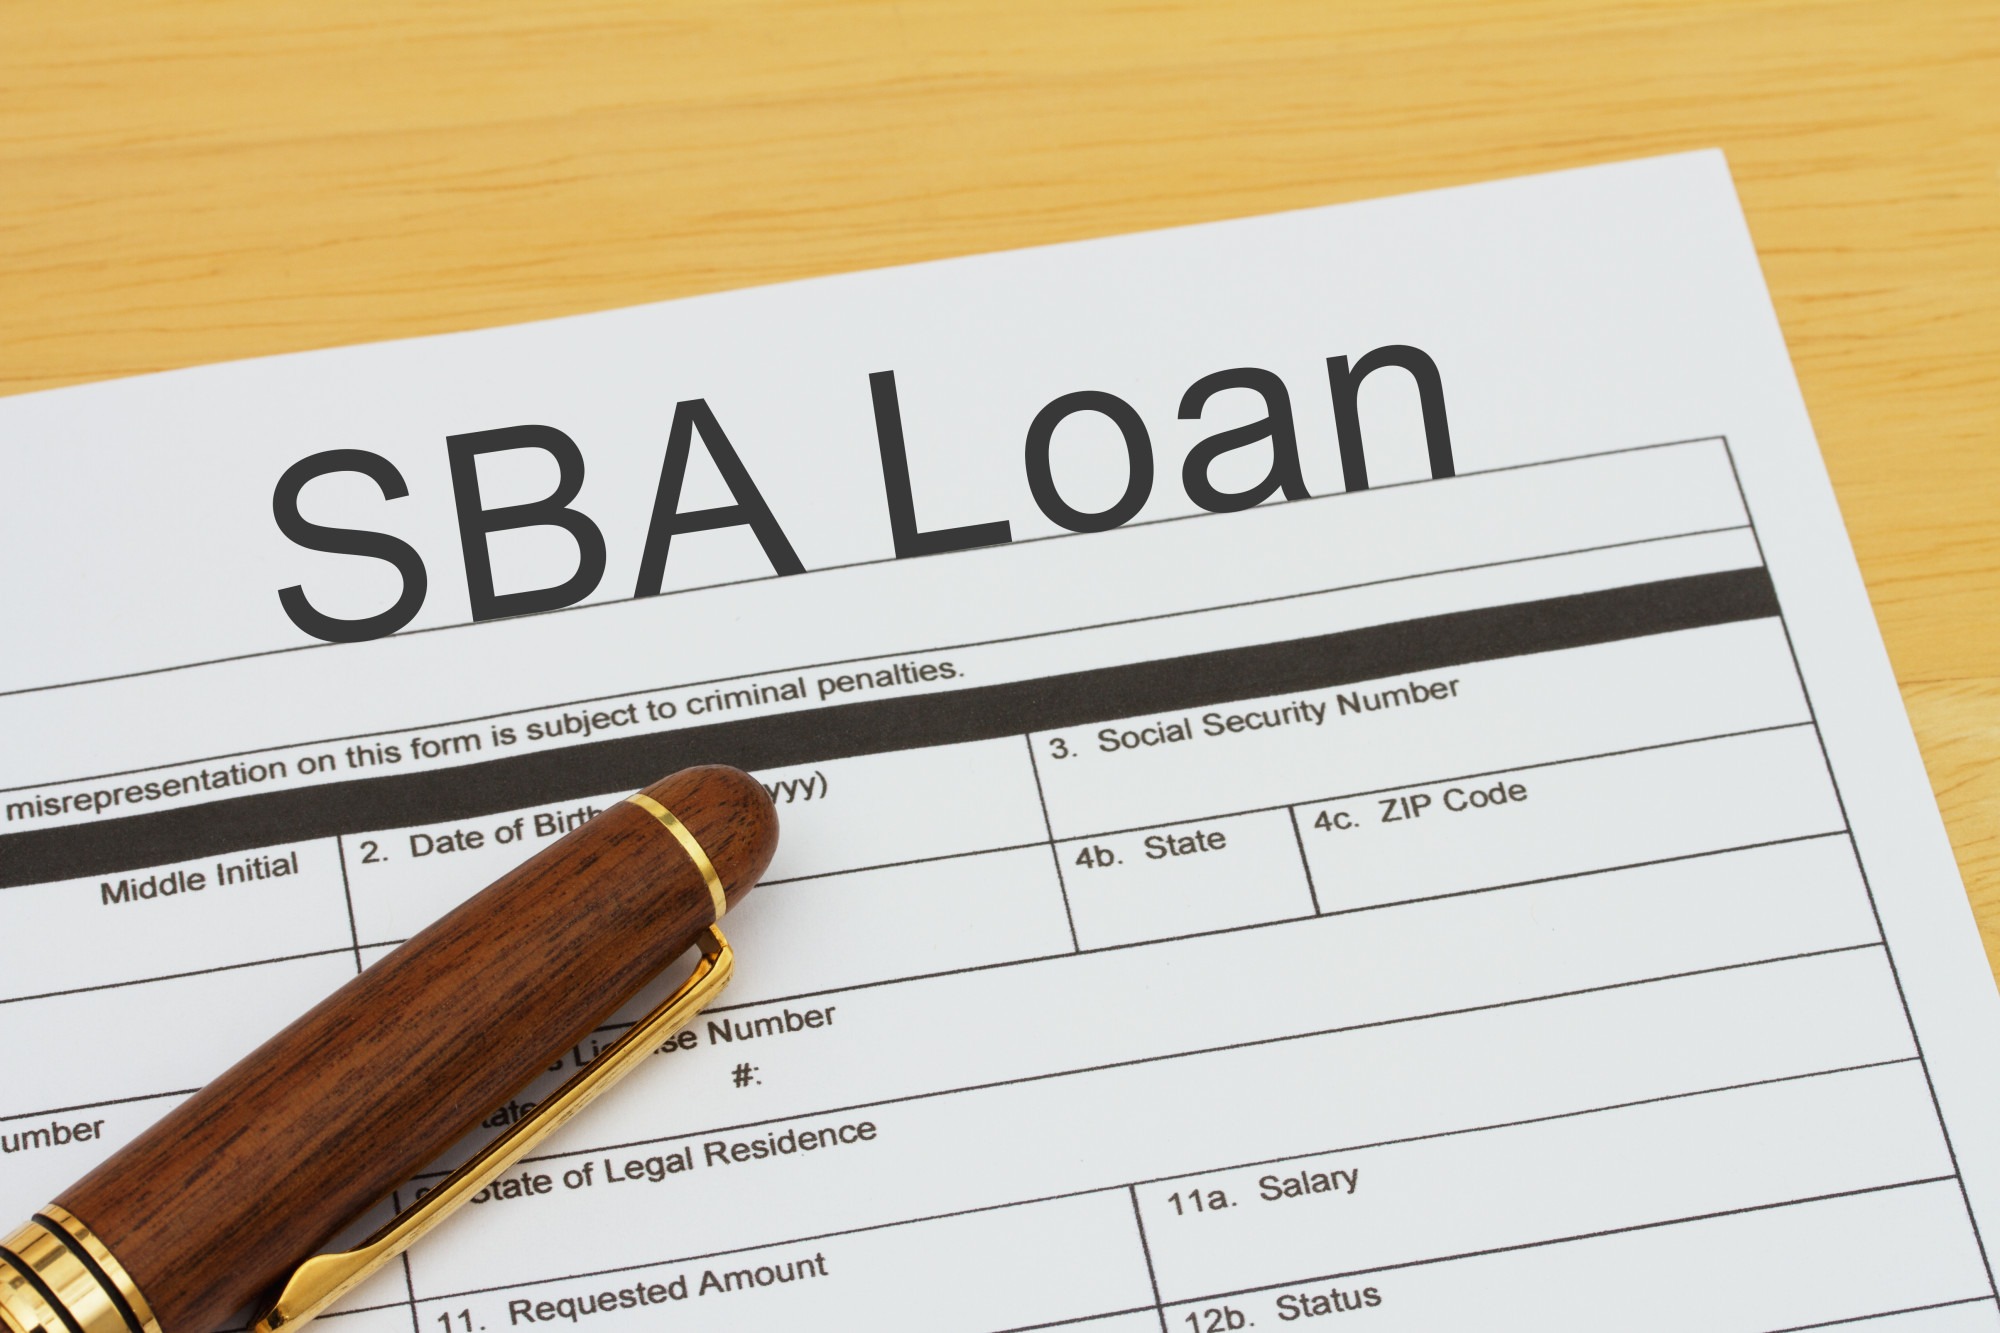 7 Reasons You Should Apply For SBA Loan Assistance